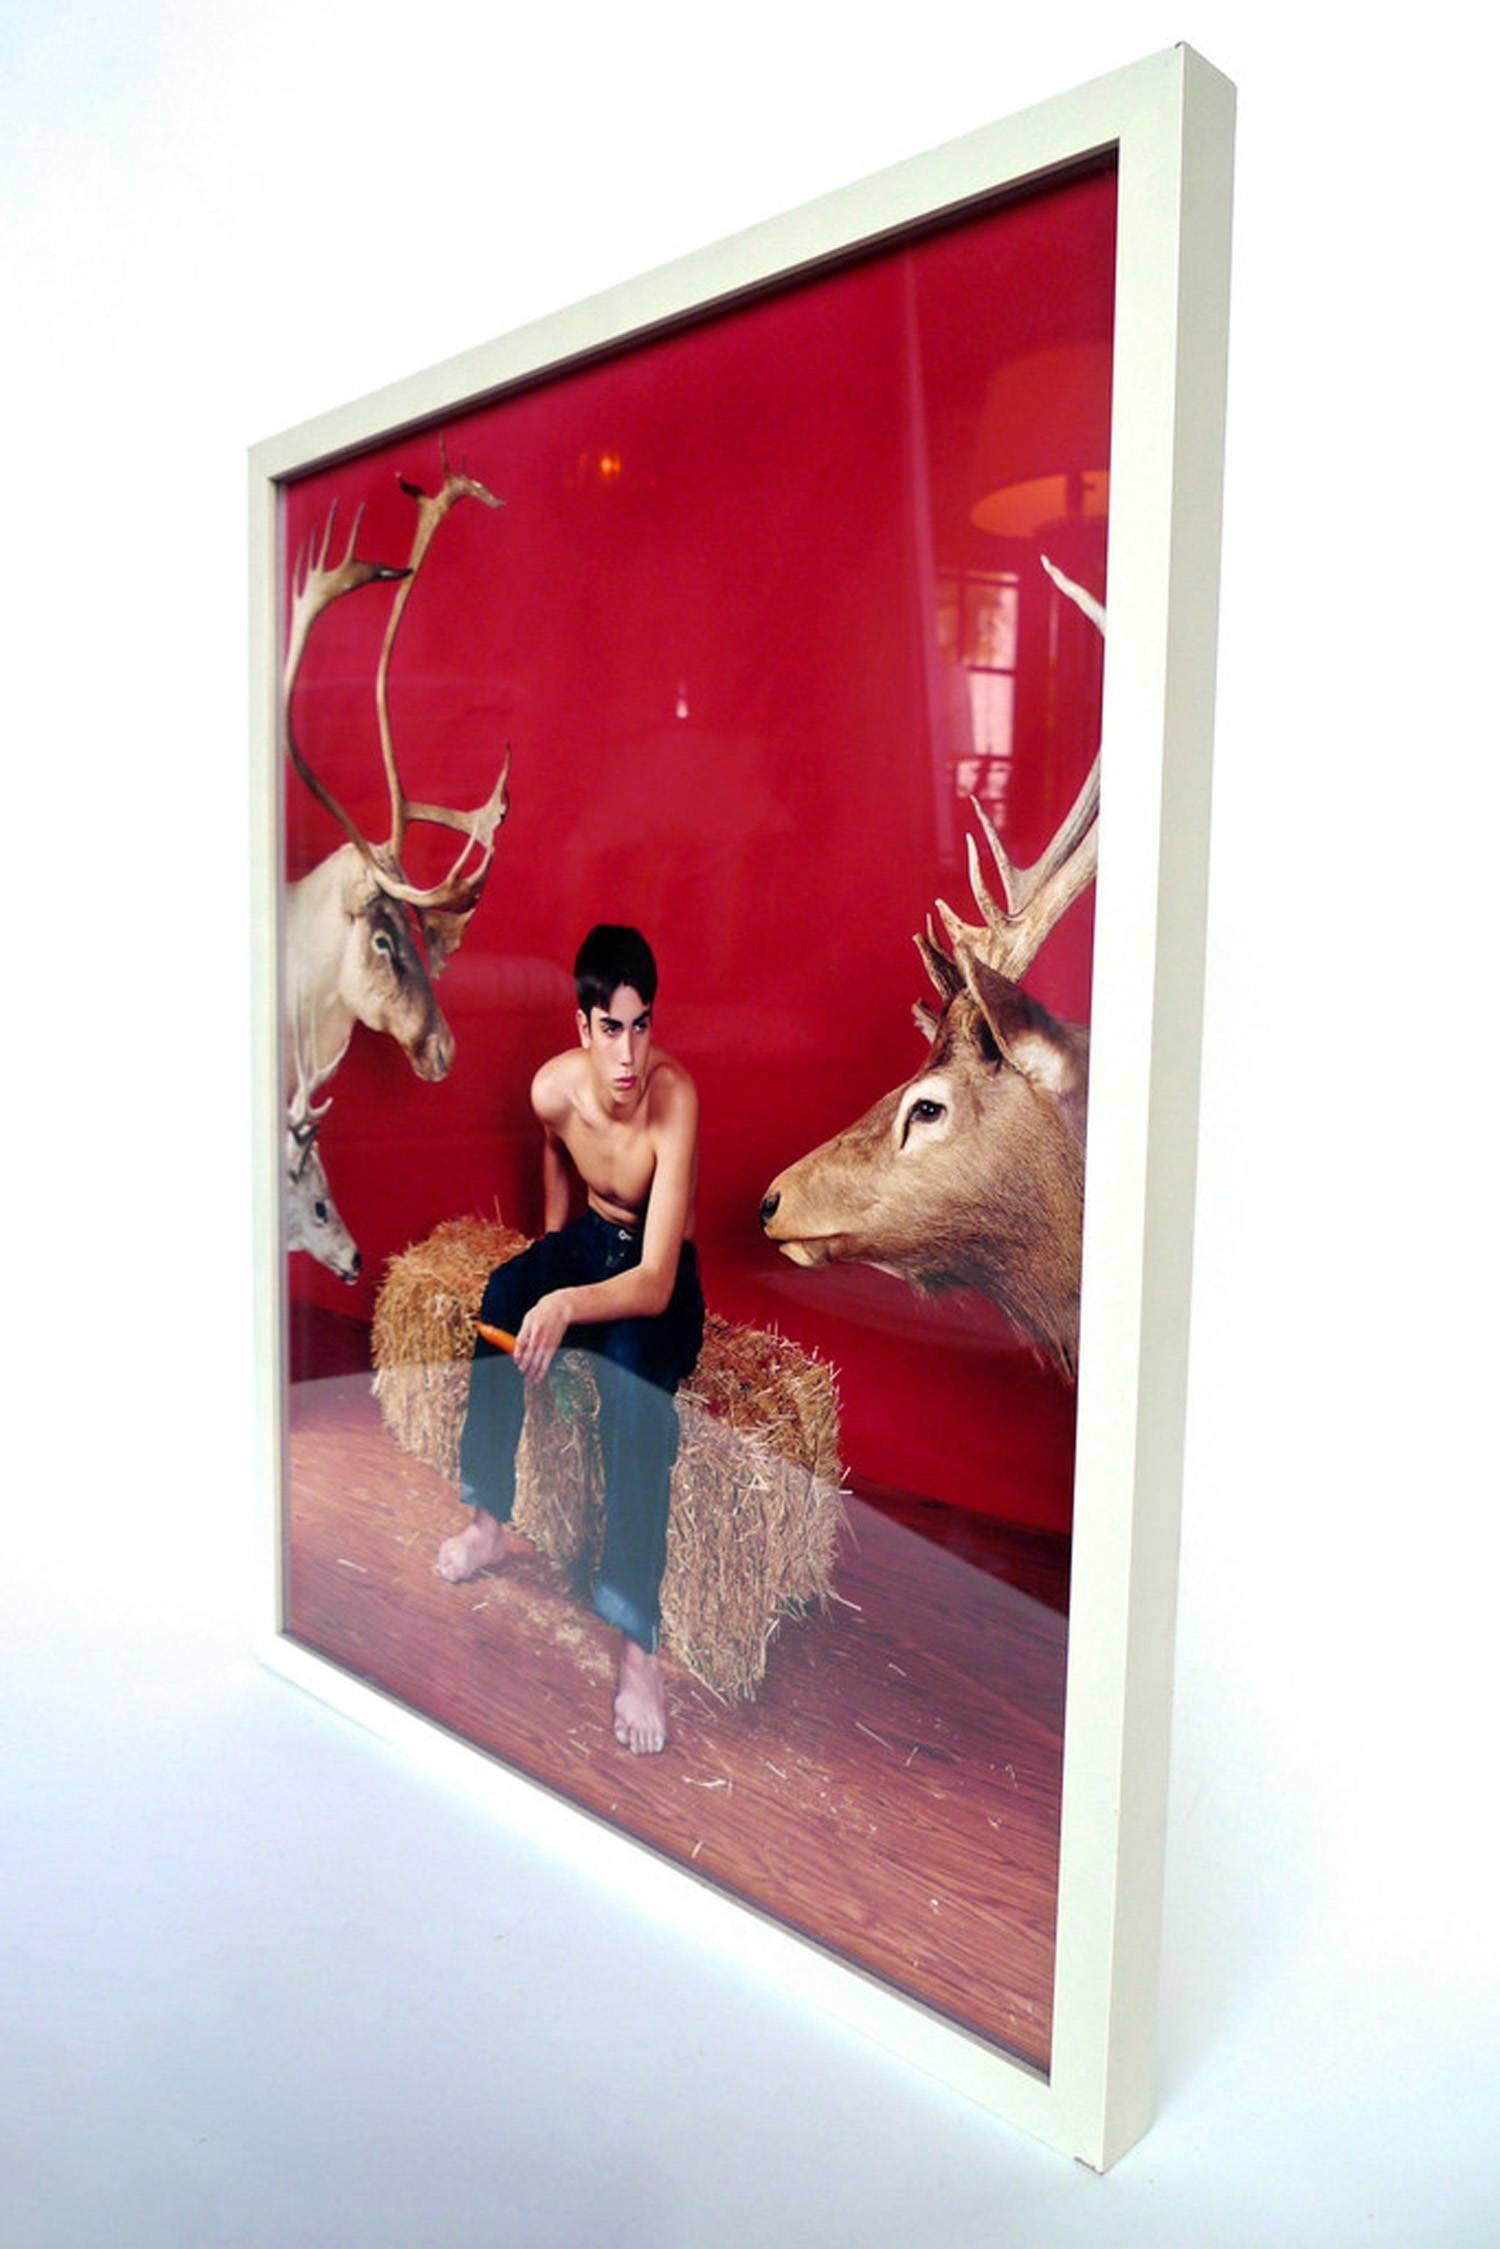 The red backdrop in this Michael Stuetz photograph grabs you first and makes you focus on the strange collection of details: The shirtless and shoeless young man holding a carrot, the bundle of hay he is sitting on, his big feet, the woodgrain of